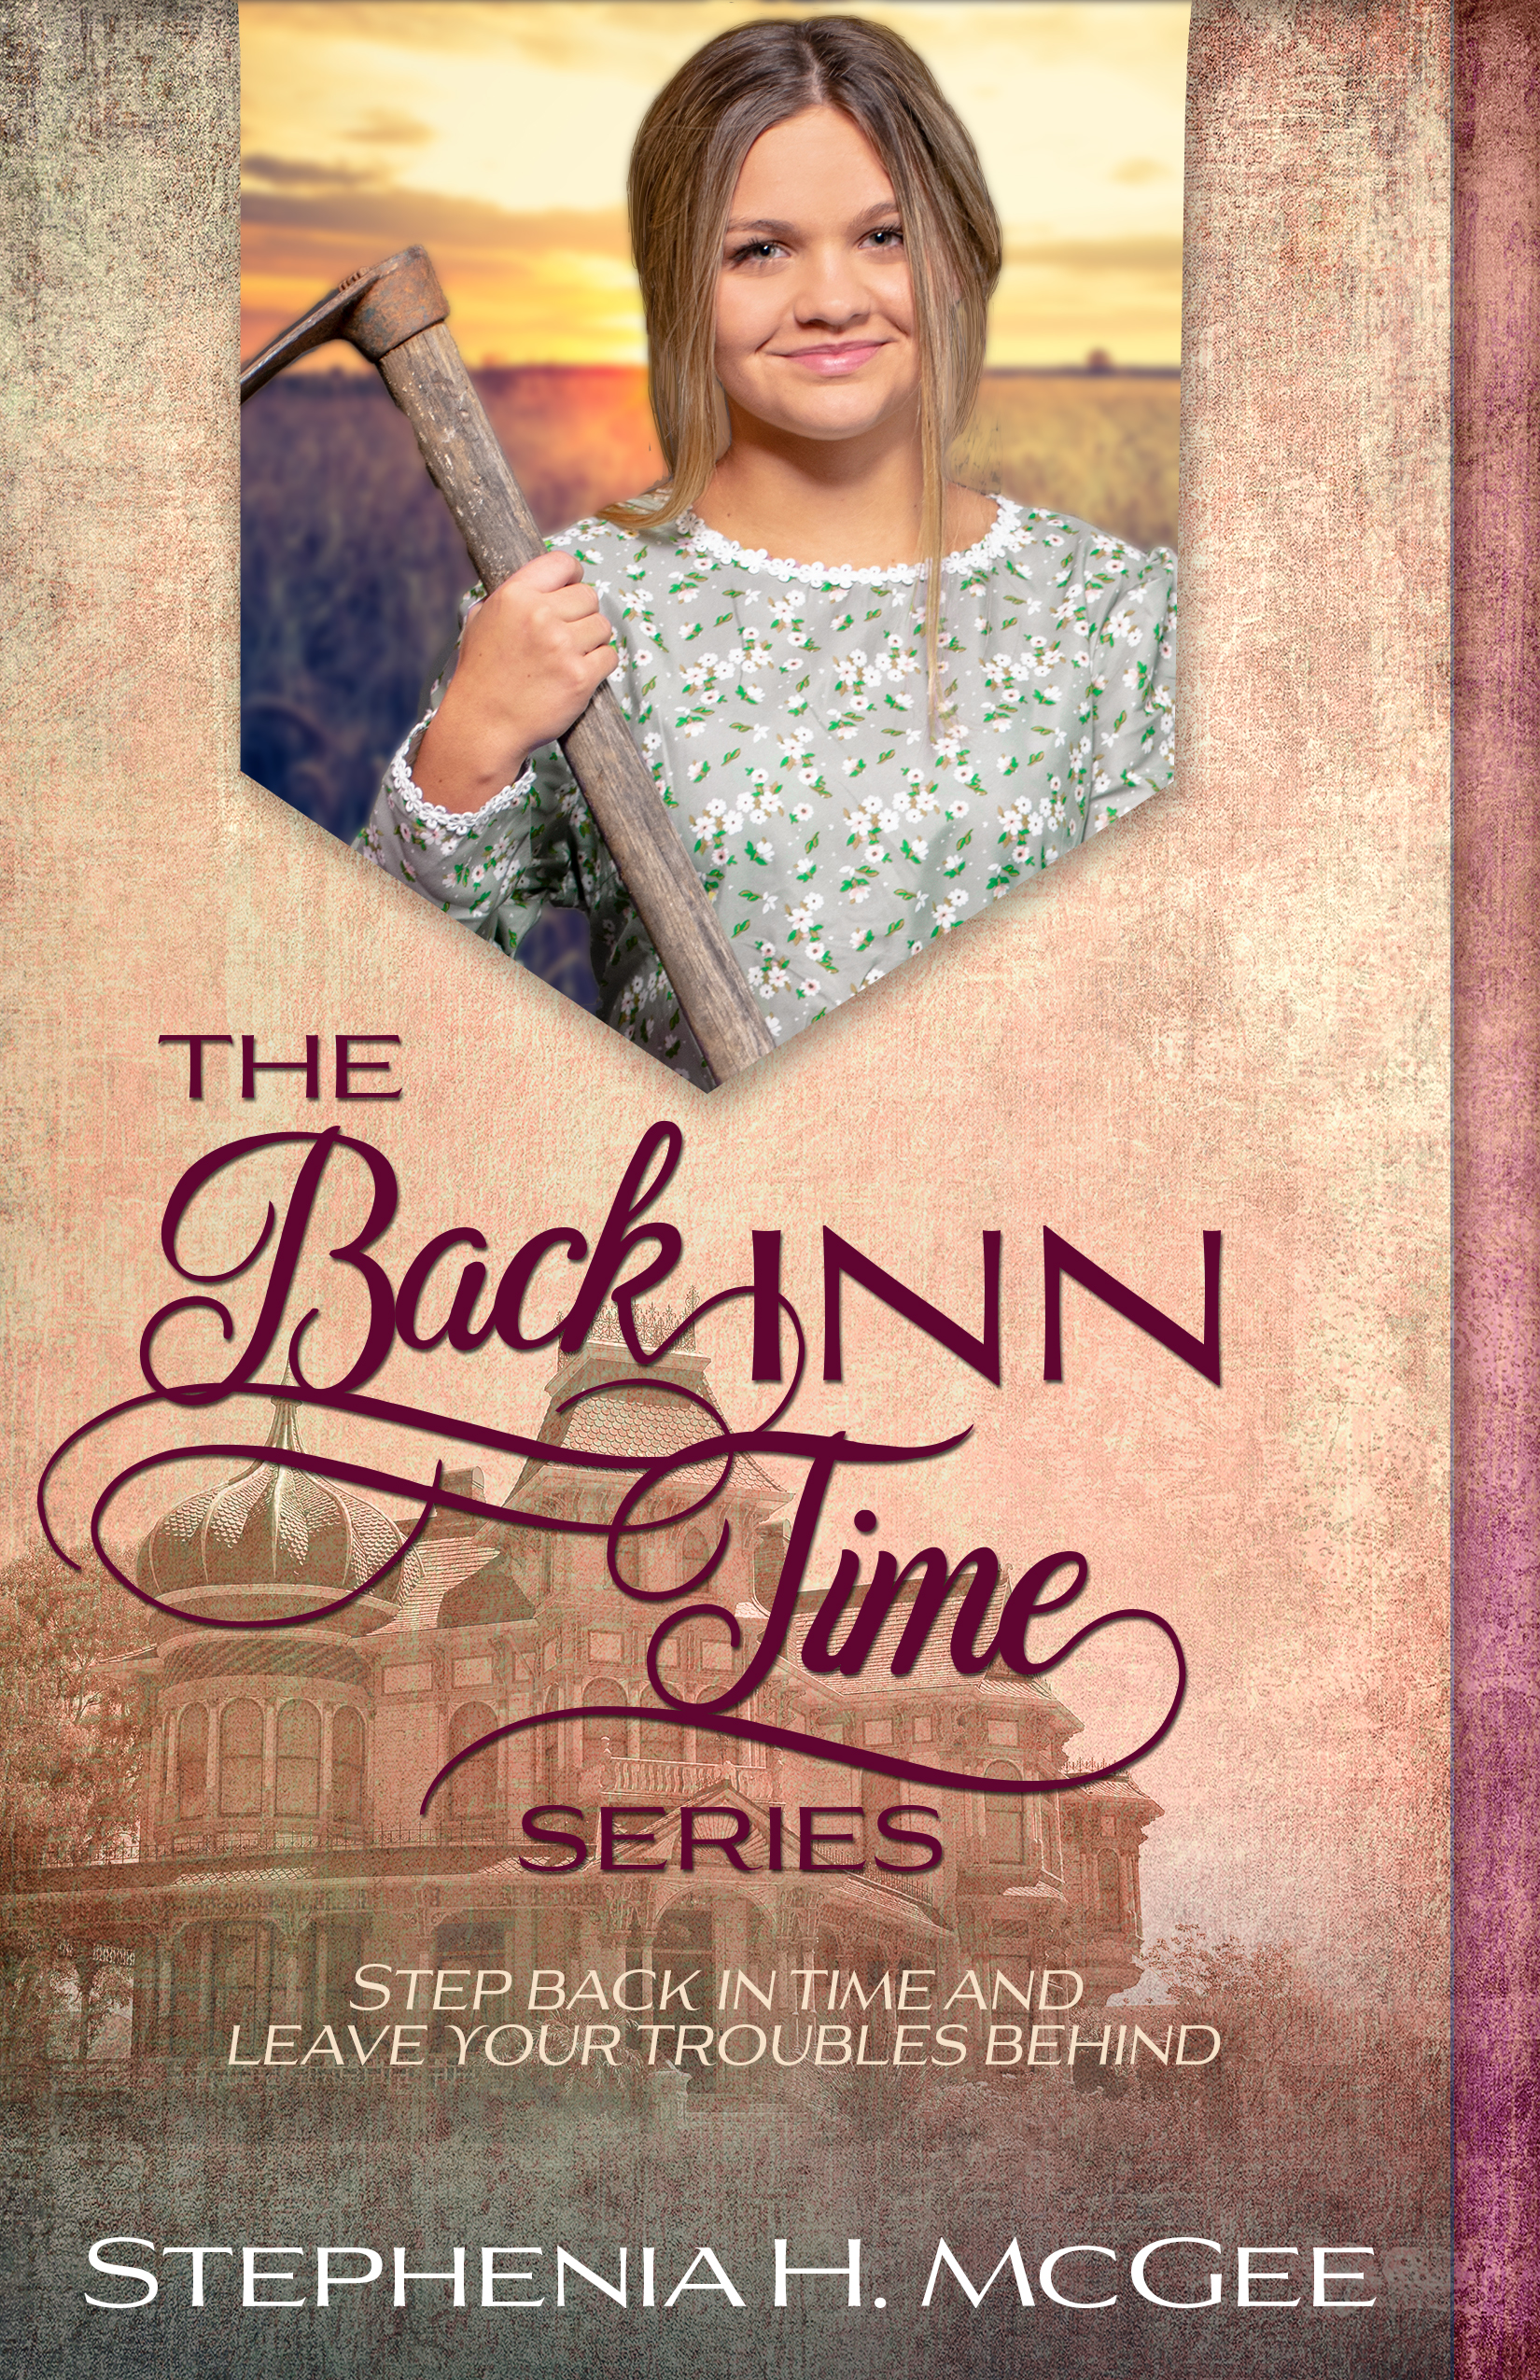 Featured image for “The Back Inn Time Series Books 1-4”